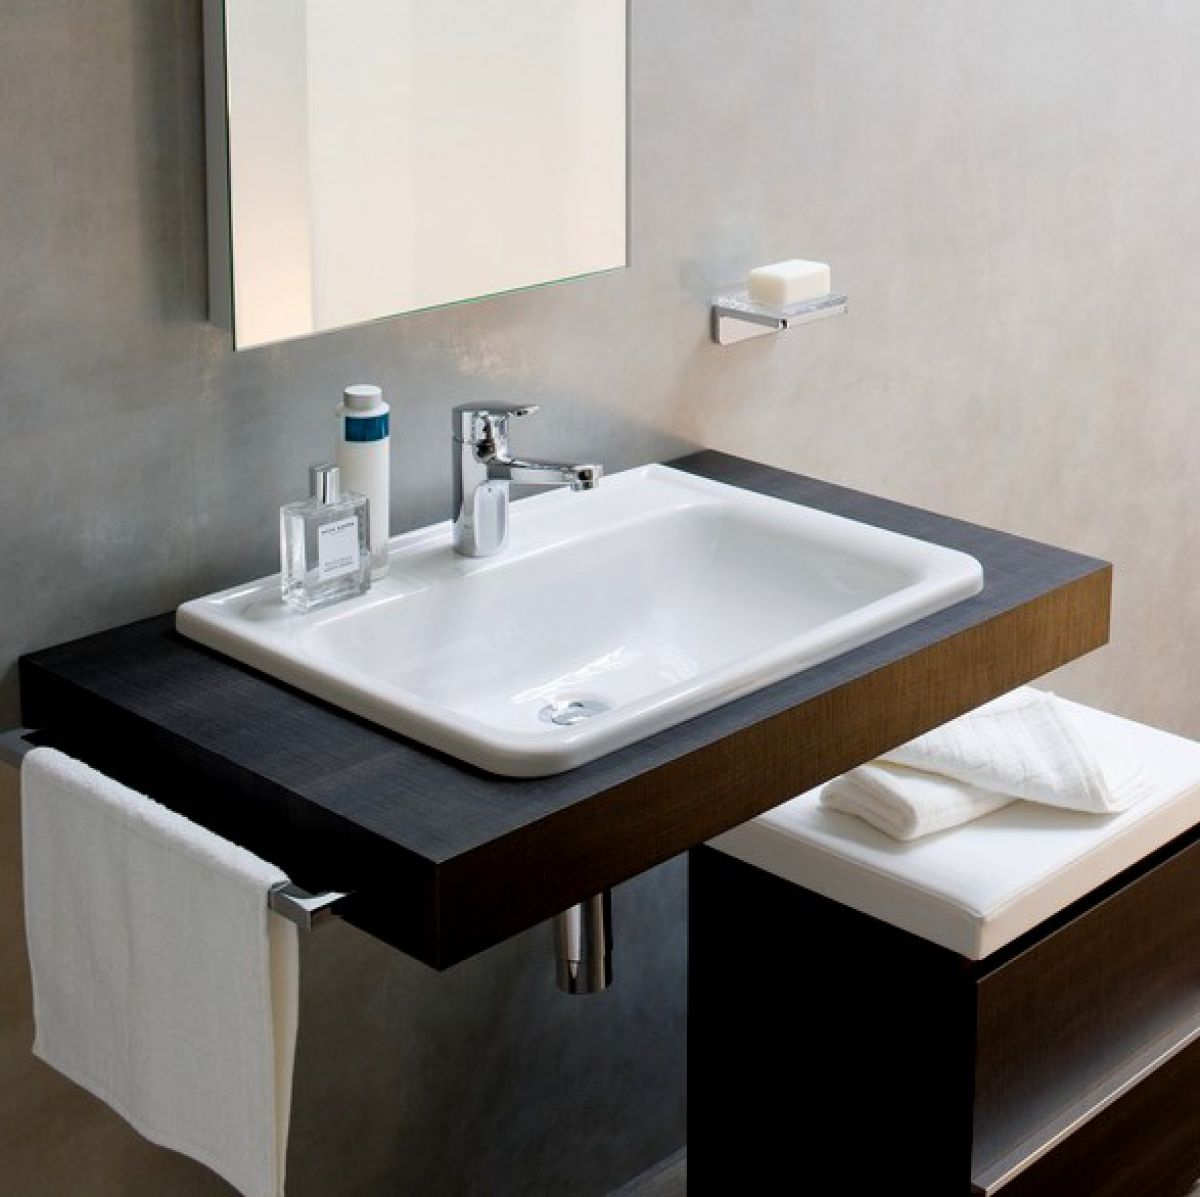 Inset basin by Laufen